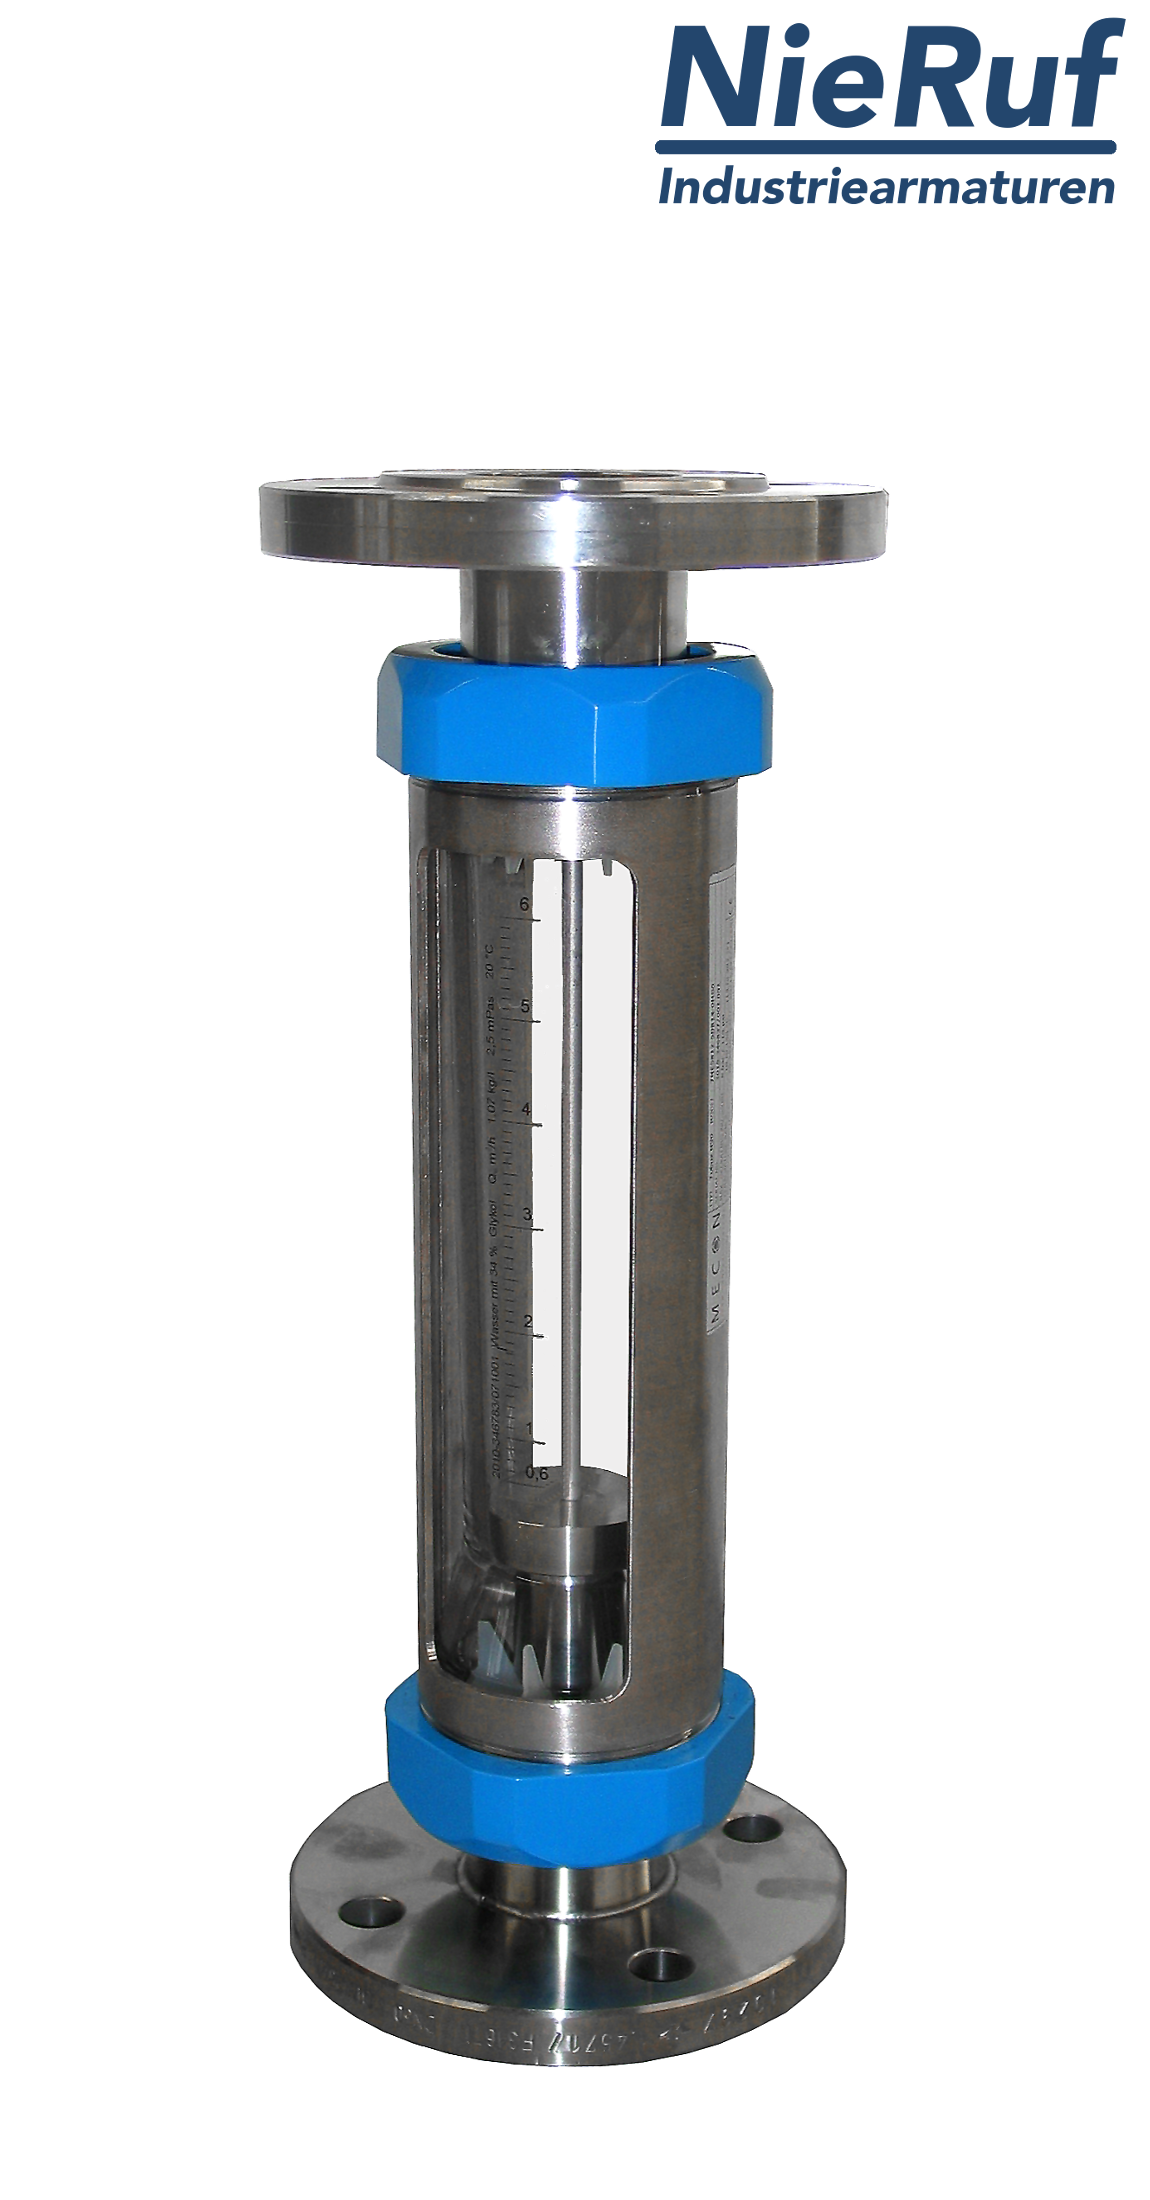 Variable area flowmeter stainless steel + borosilicate flange DN10 31.5 - 315.0 l/h water FKM